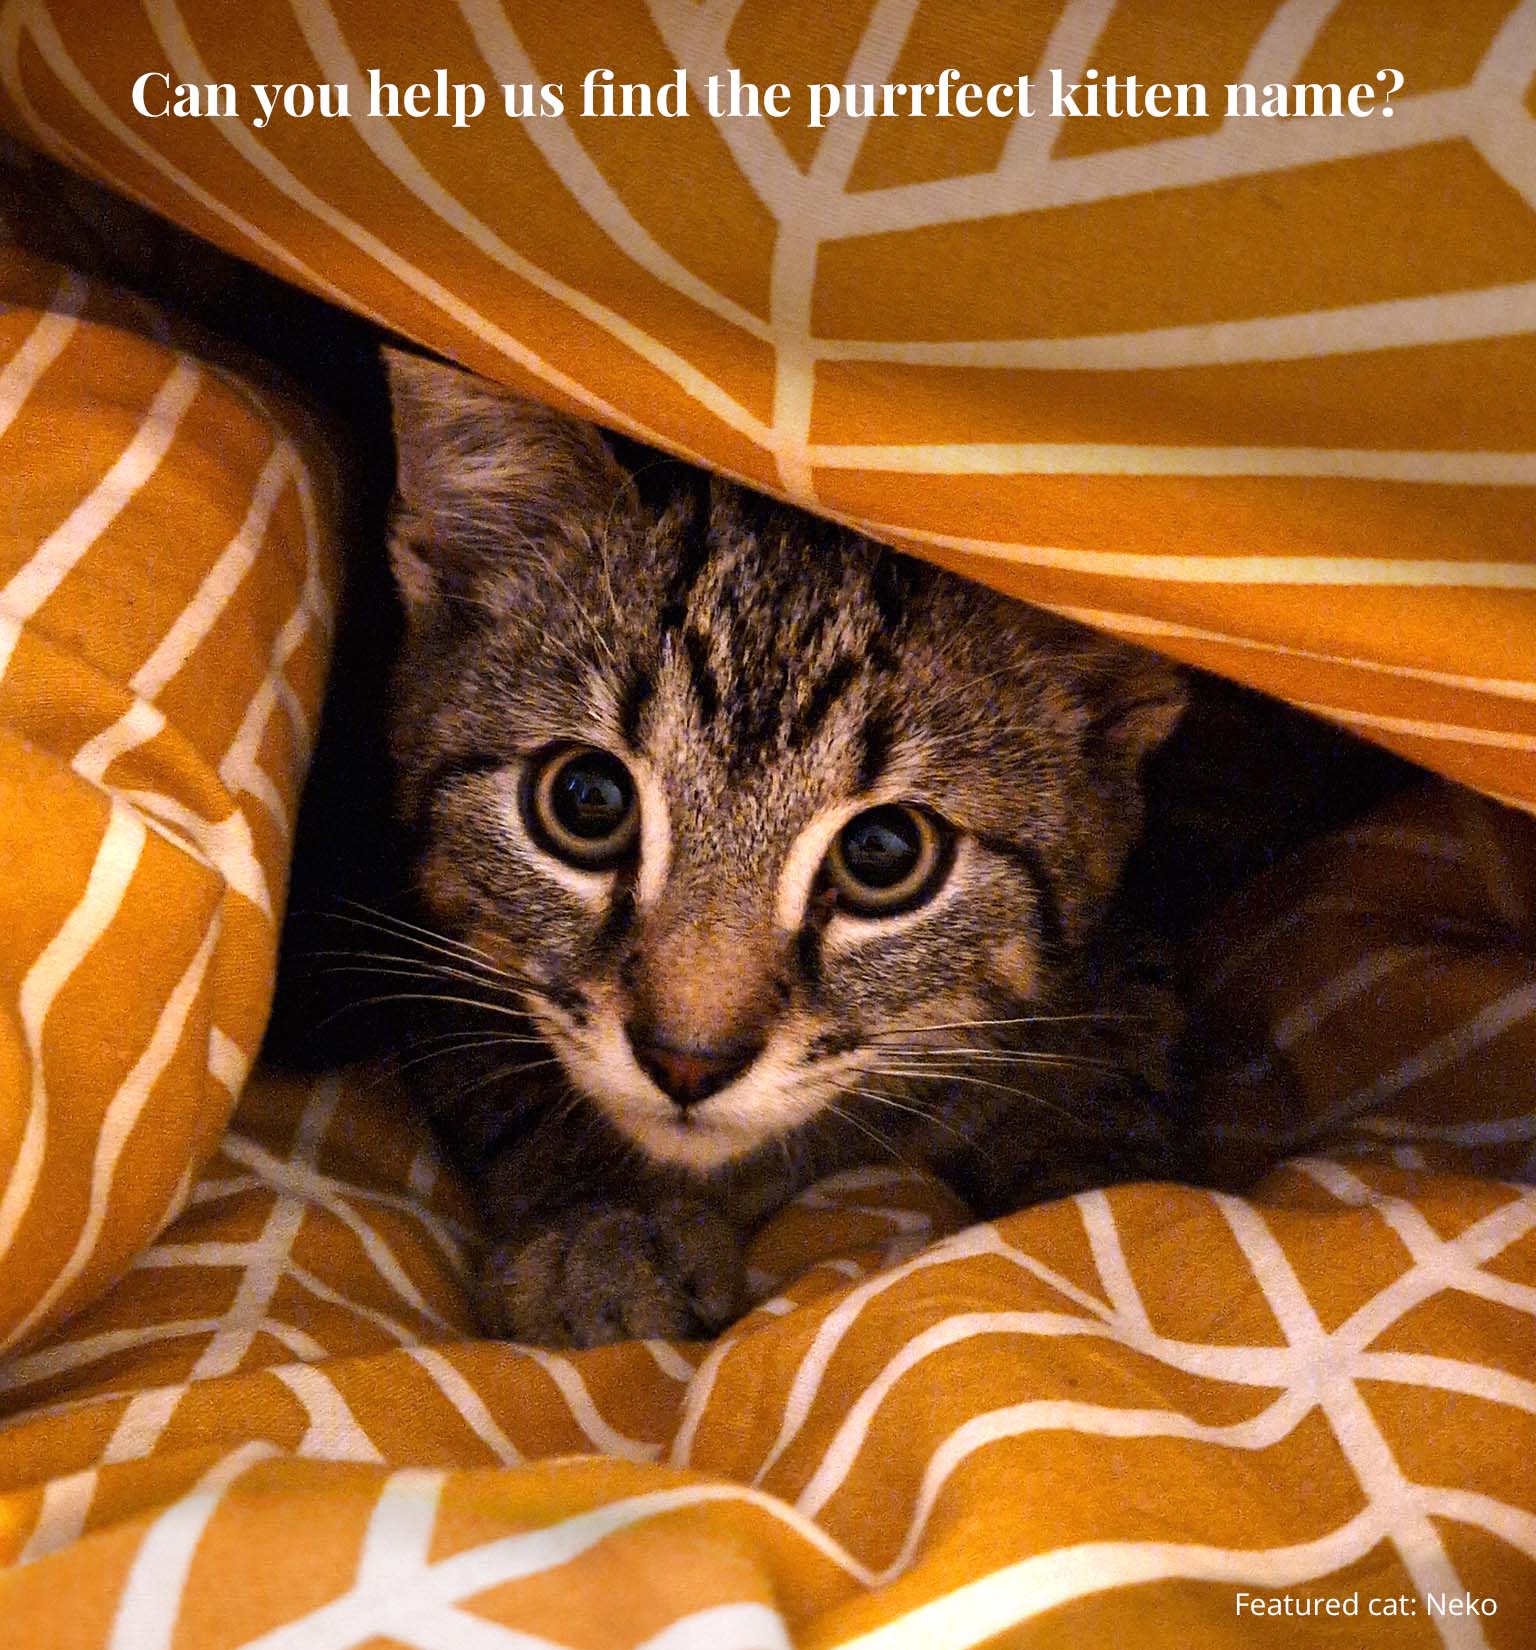 Can you help us find the purrfect kitten name?